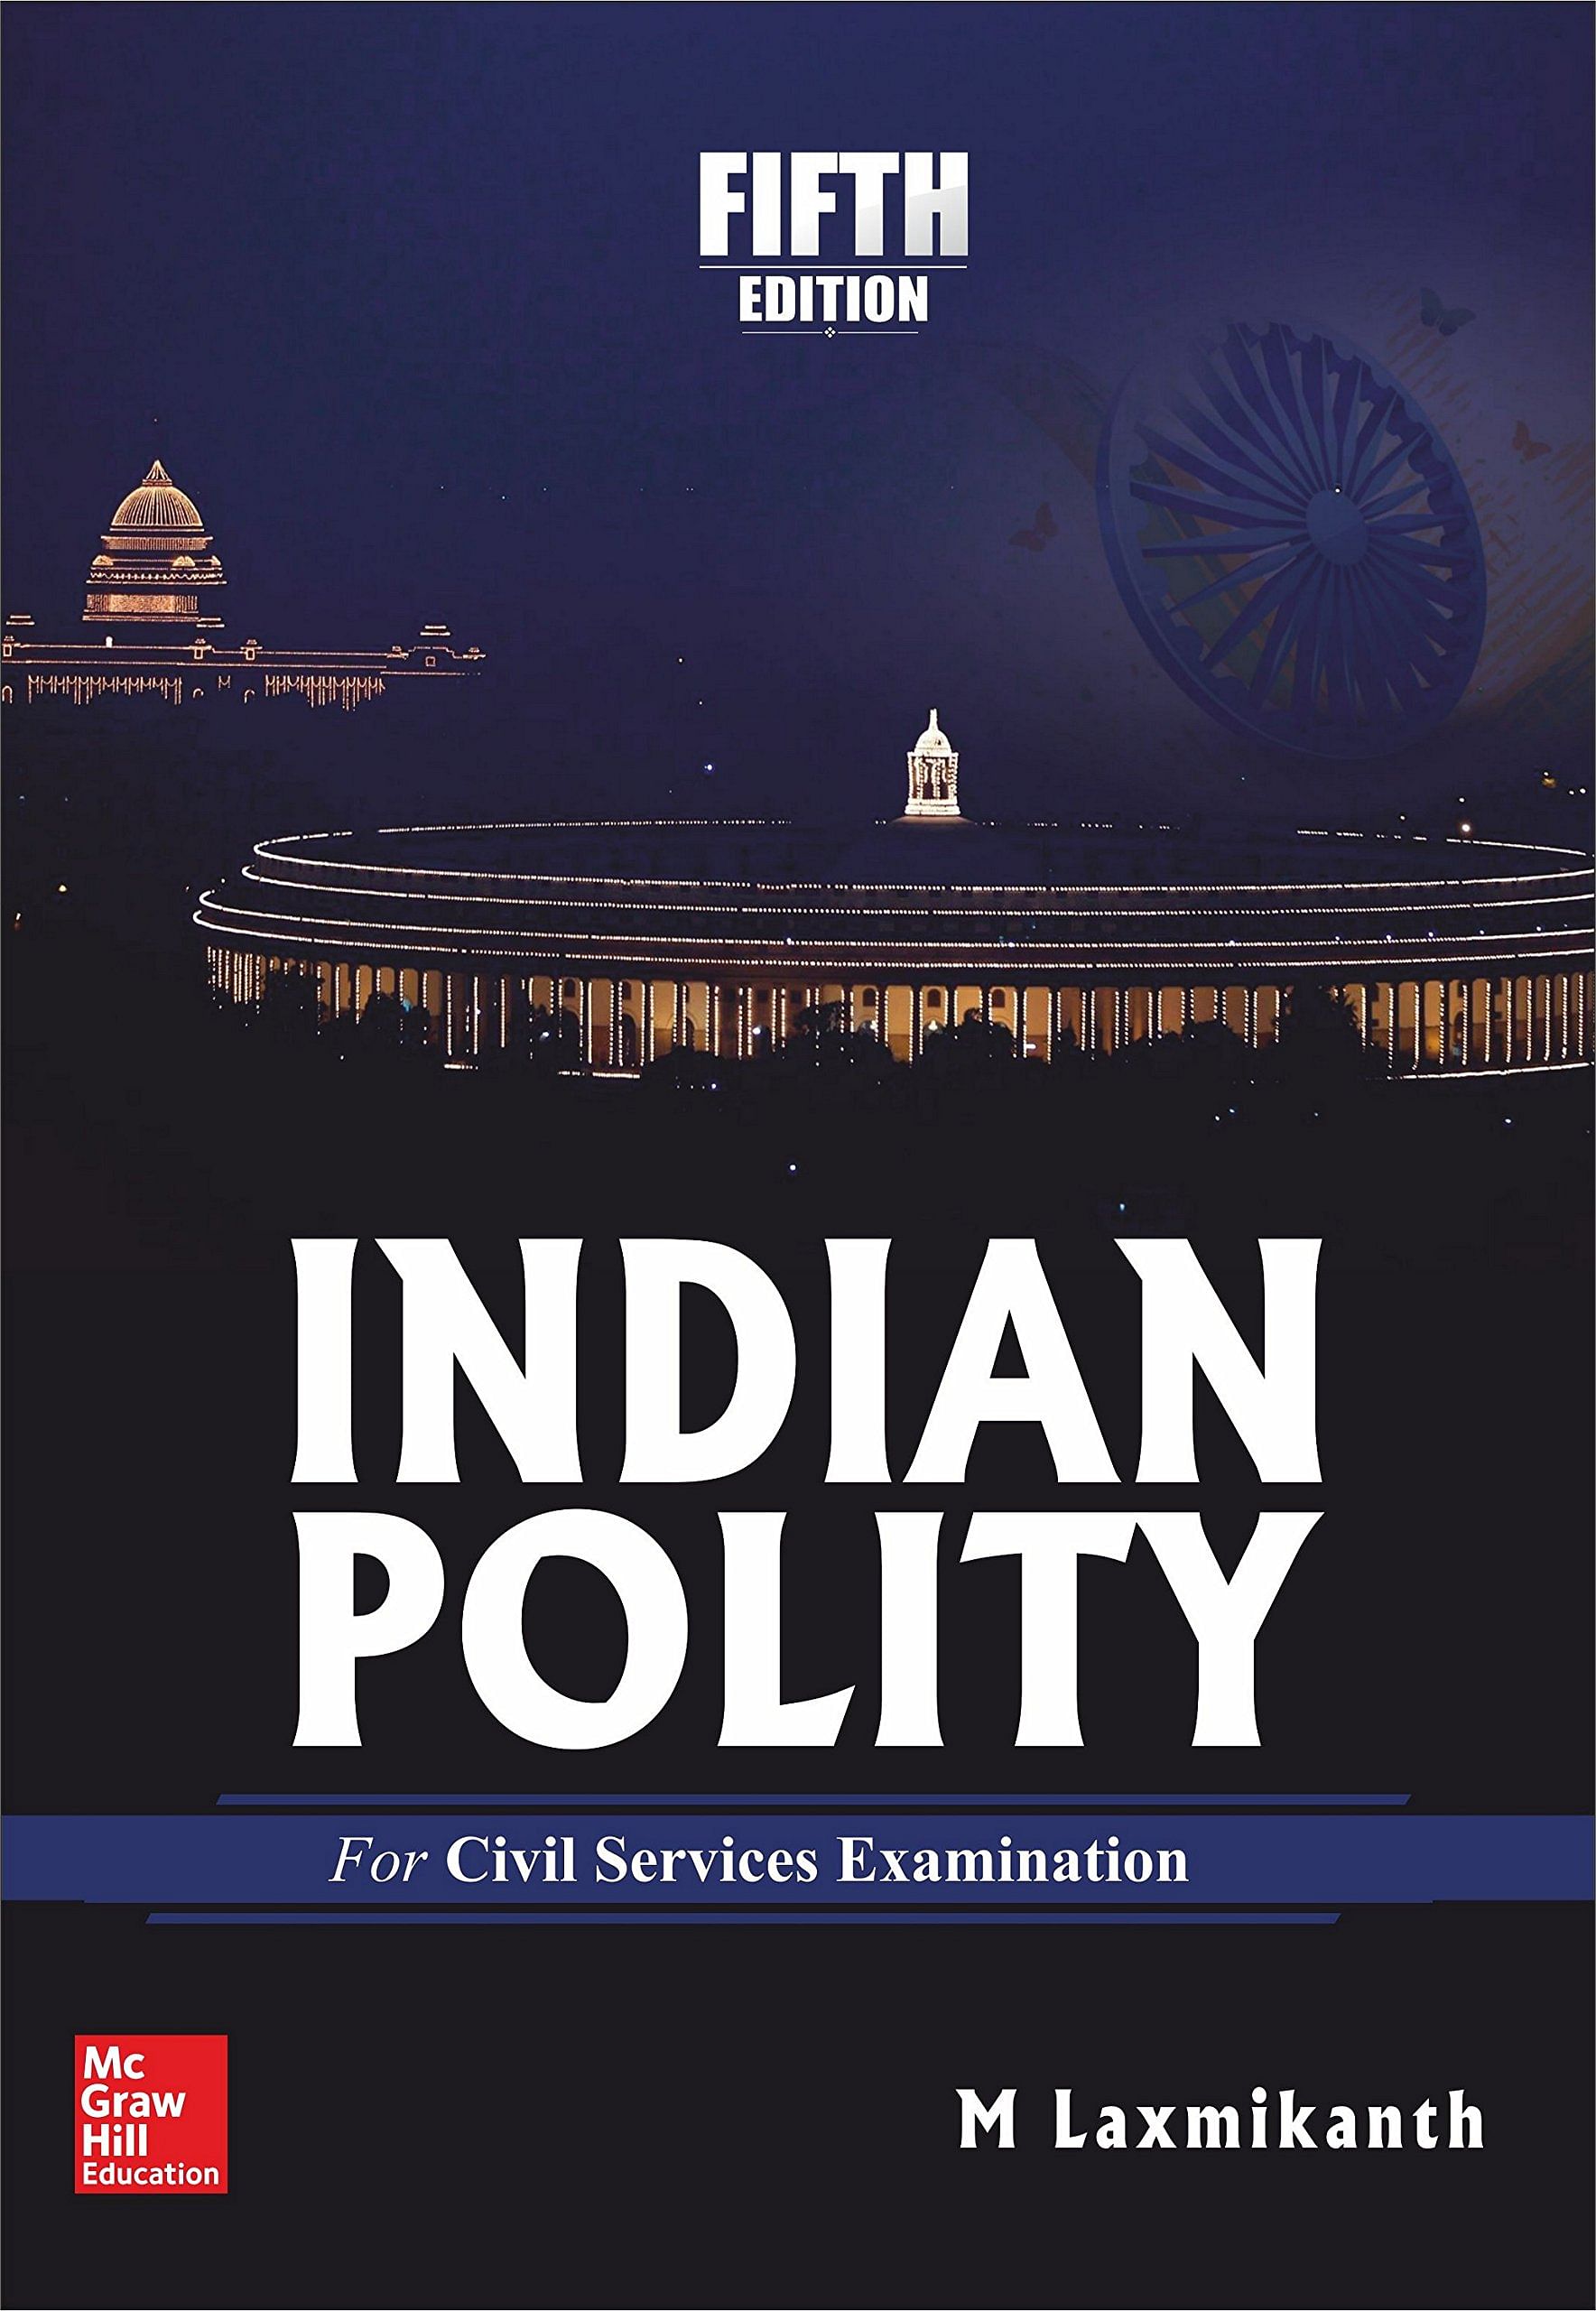 Indian Polity by M.Laxmikanth.